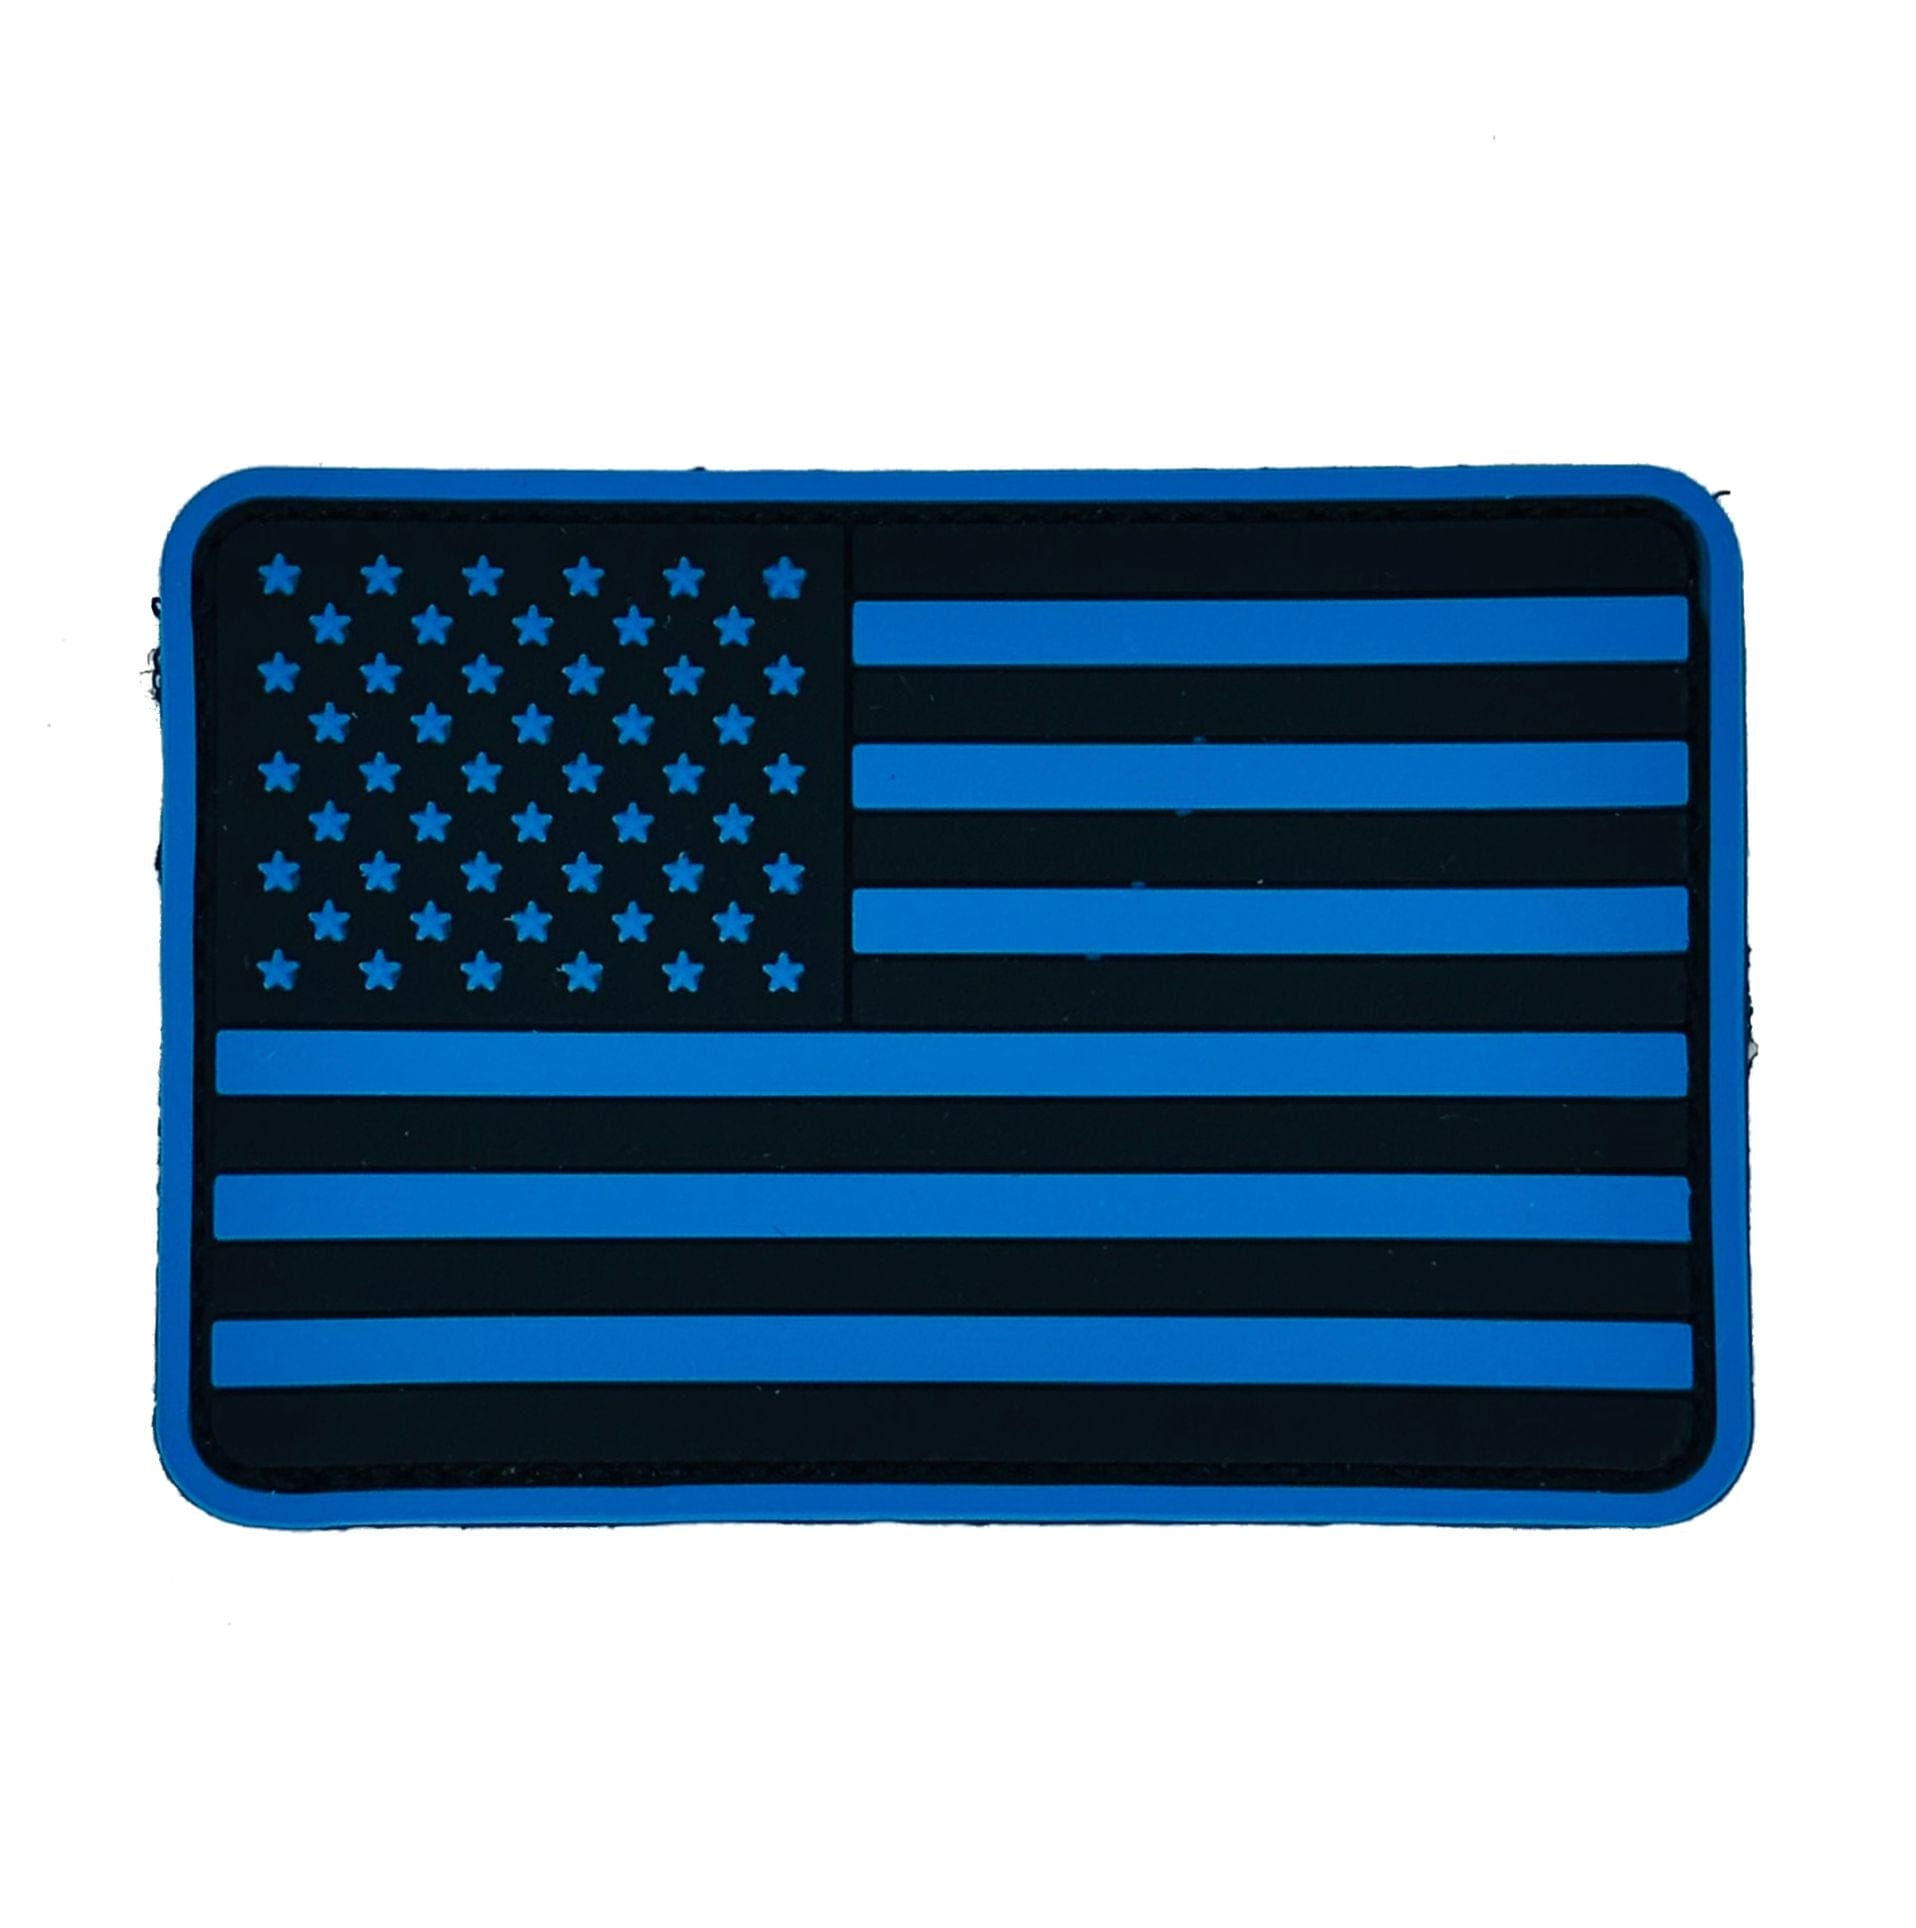 Tactical Gear Junkie Patches Blue US Flag - Rounded Corners - 2"x3" PVC Patch (USA Made)